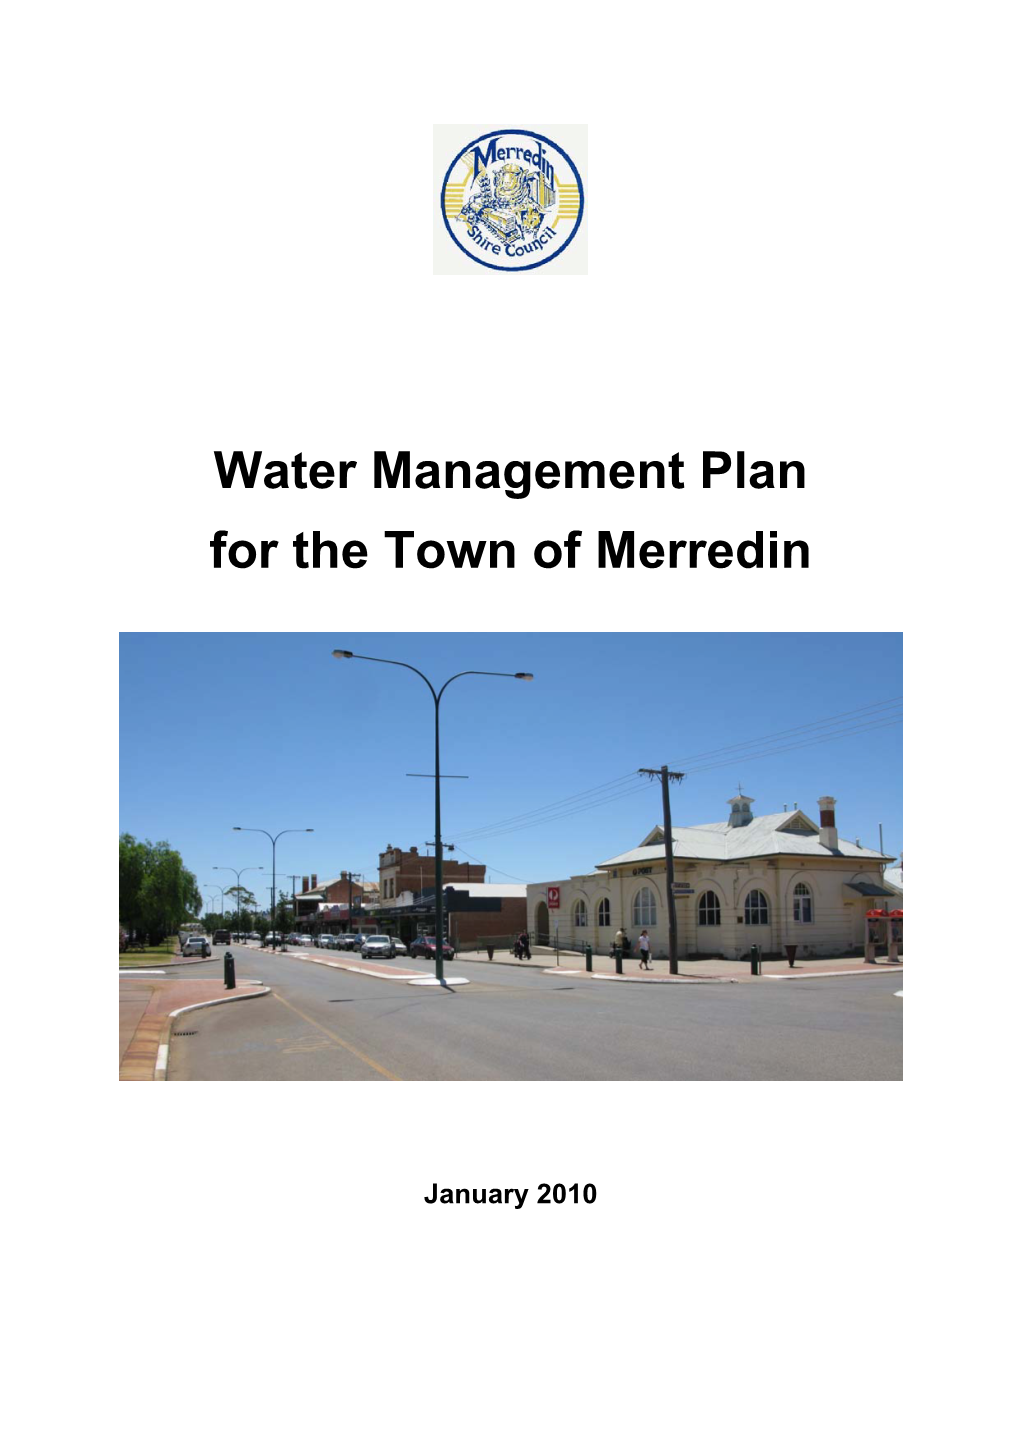 Water Management Plan for the Town of Merredin